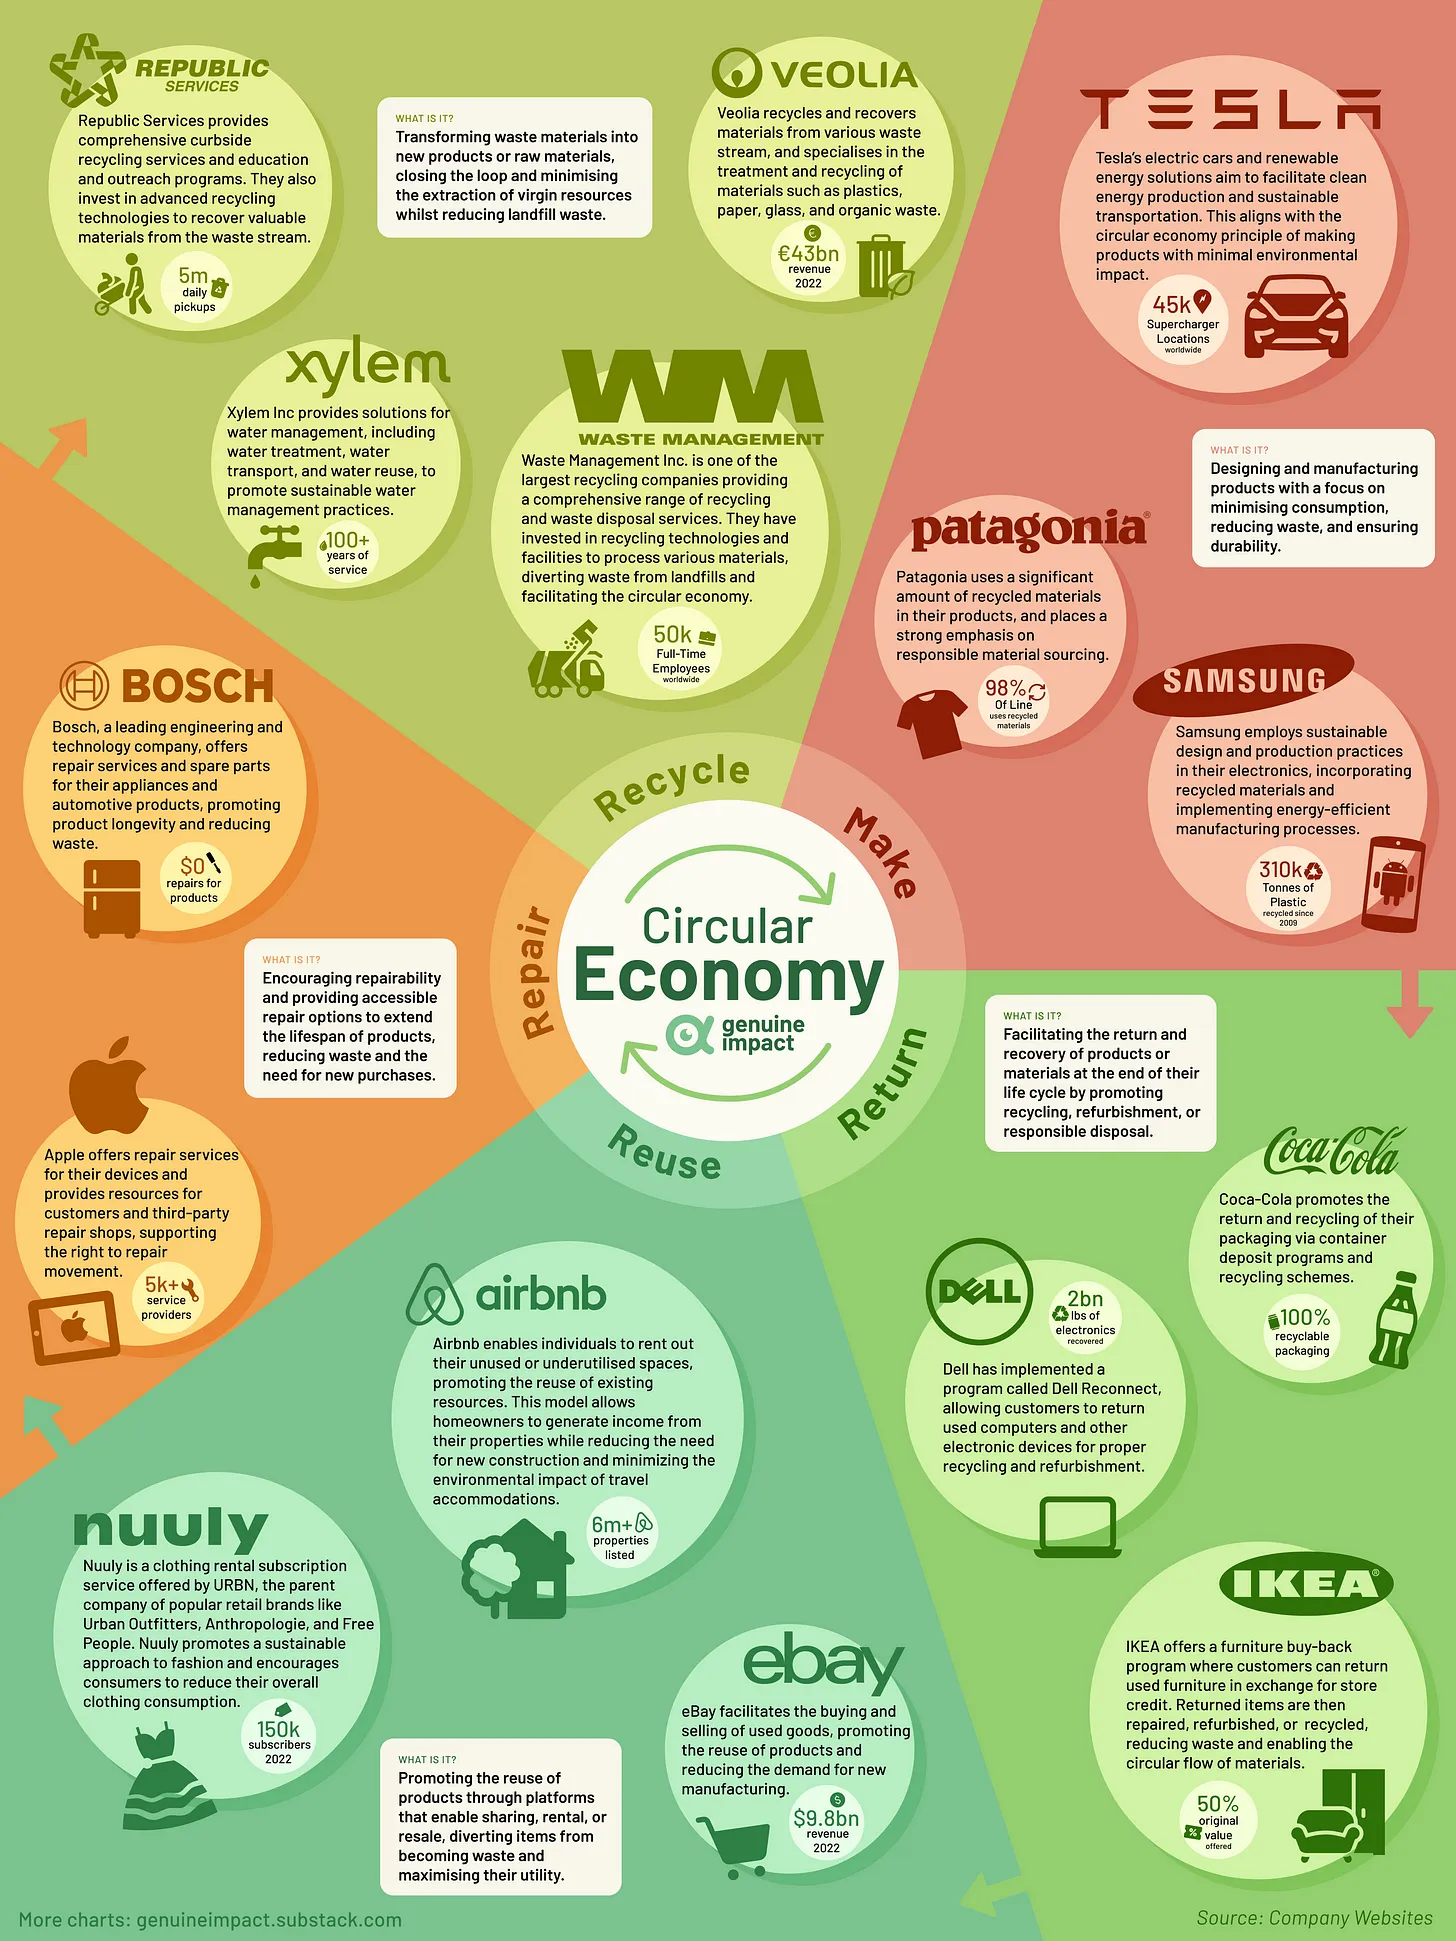 Examples of companies that have embraced the circular economy